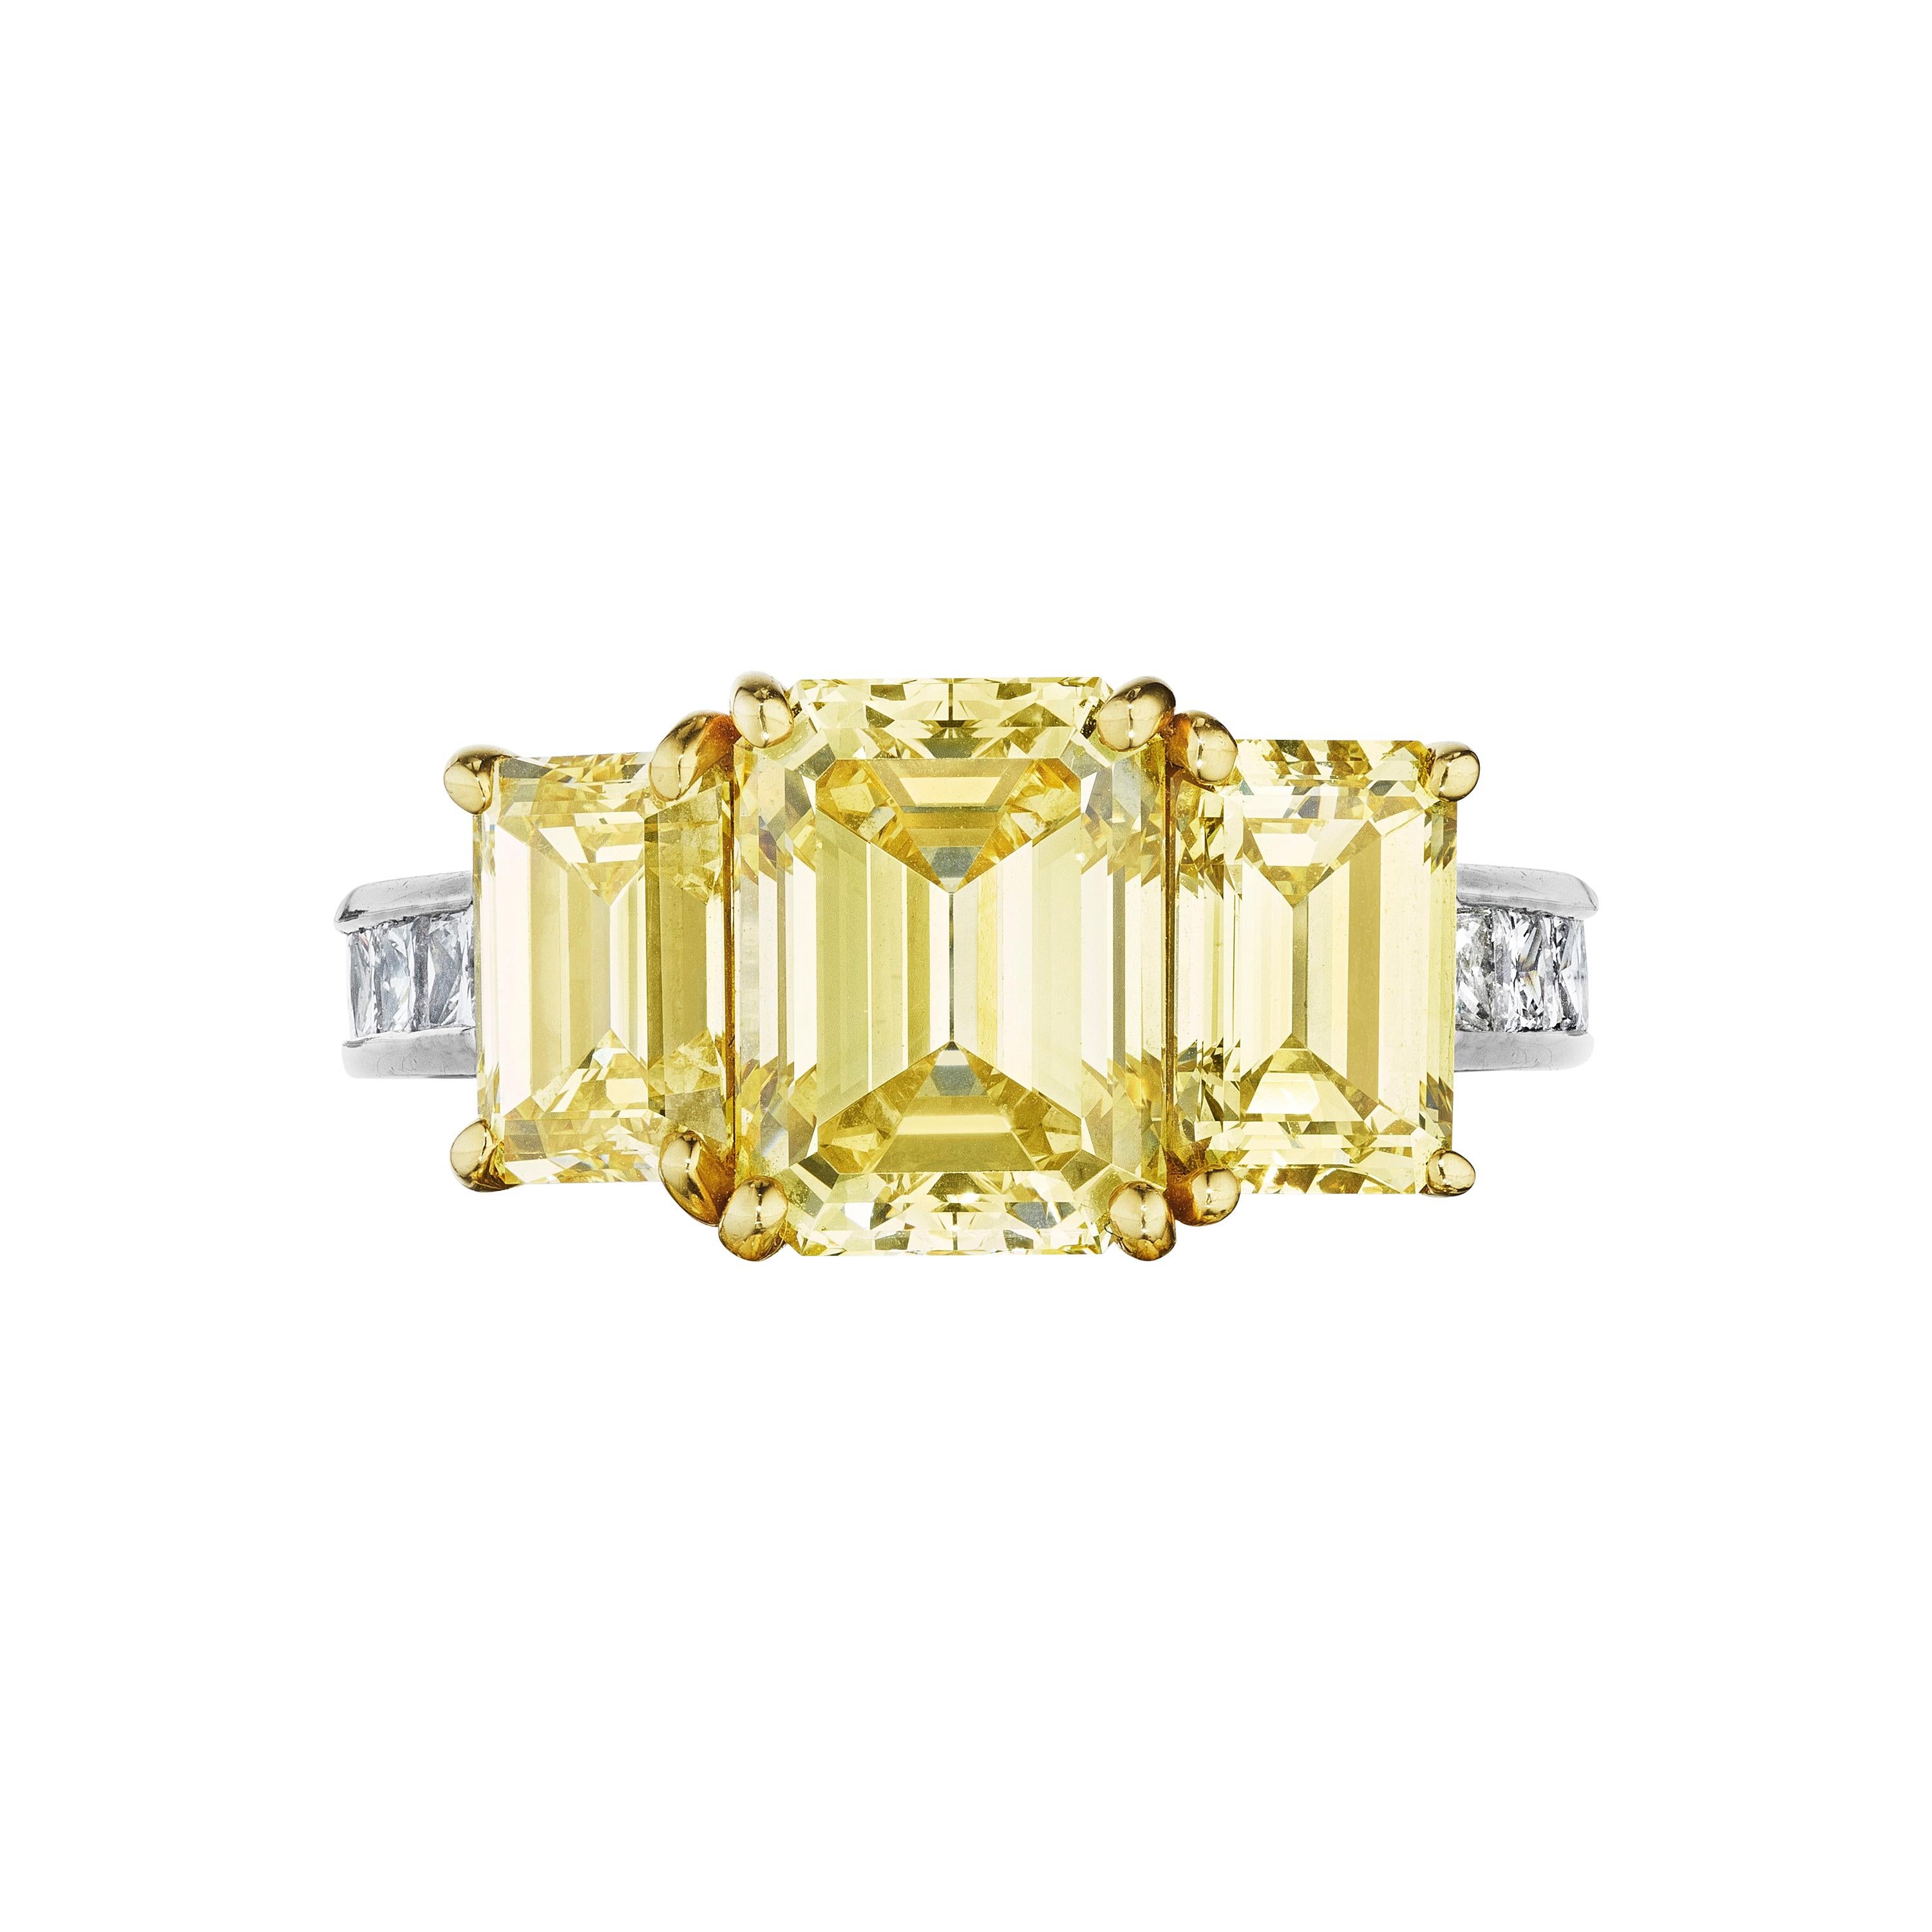 GIA Certified Natural Fancy Intense Yellow Diamond Ring by Siegelson, NY For Sale